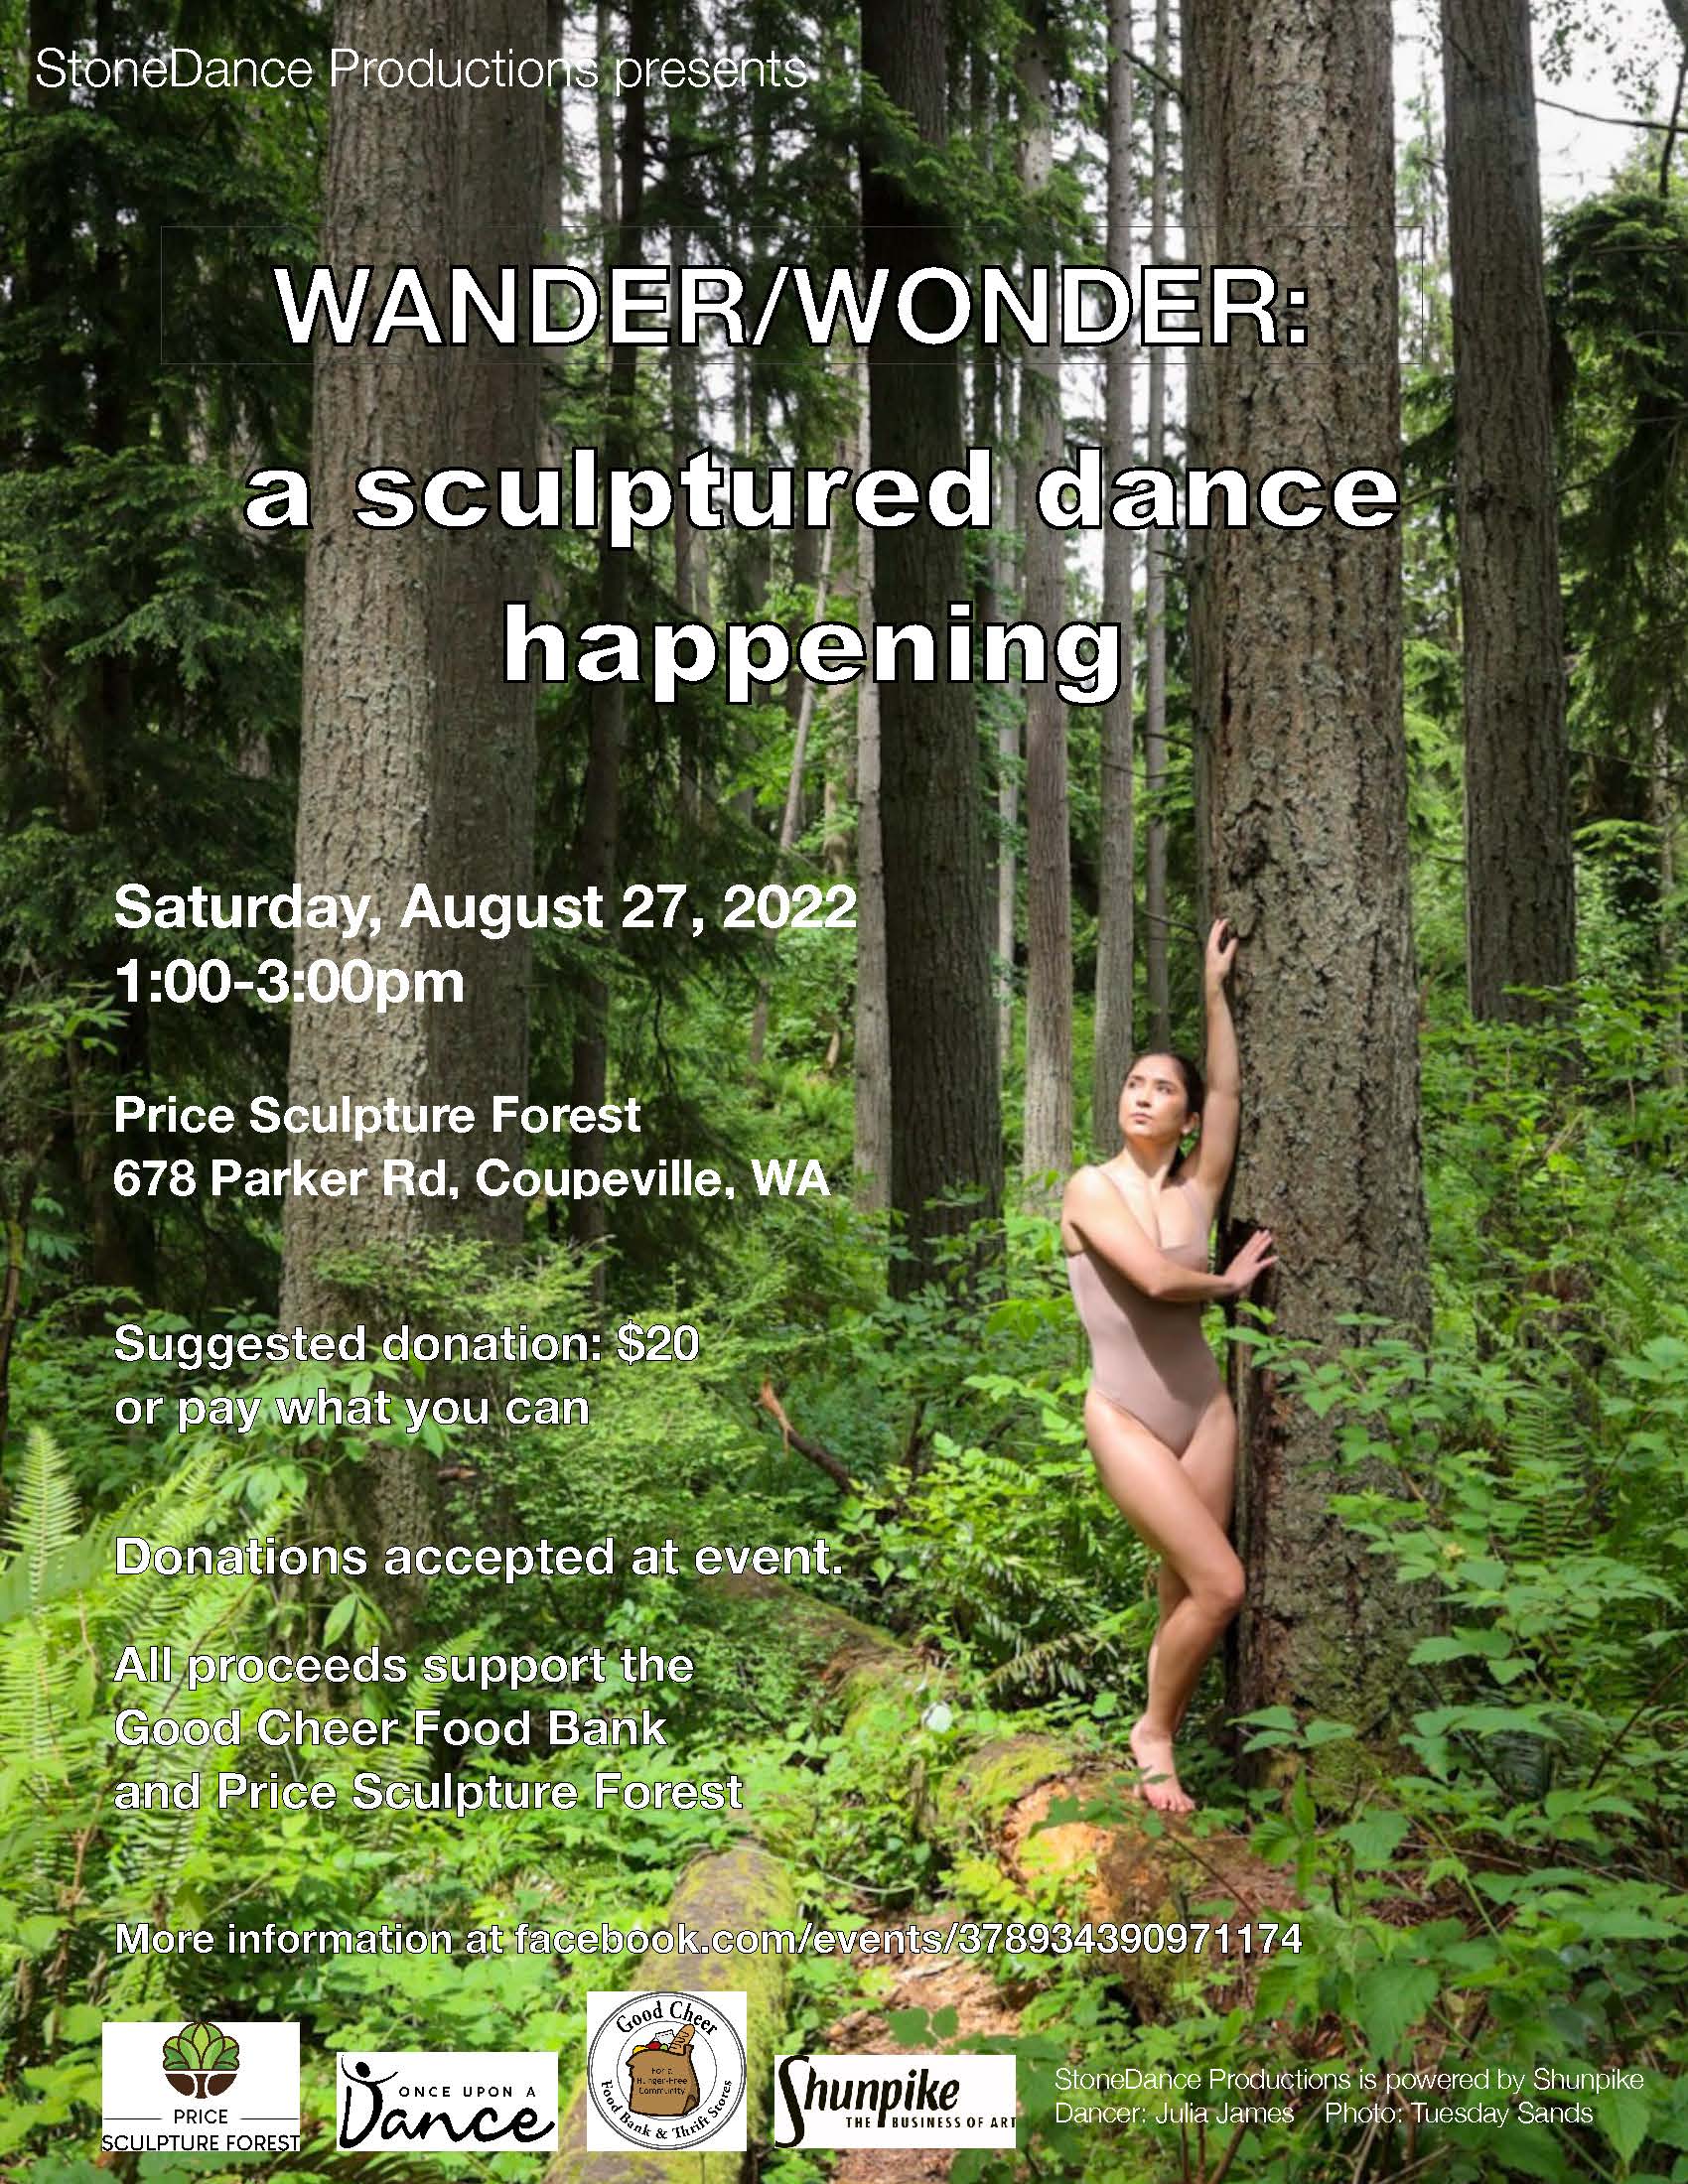 Wander/Wonder: A Sculptured Dance Happening by Eva Stone and StoneDance Productions at Price Sculpture Forest